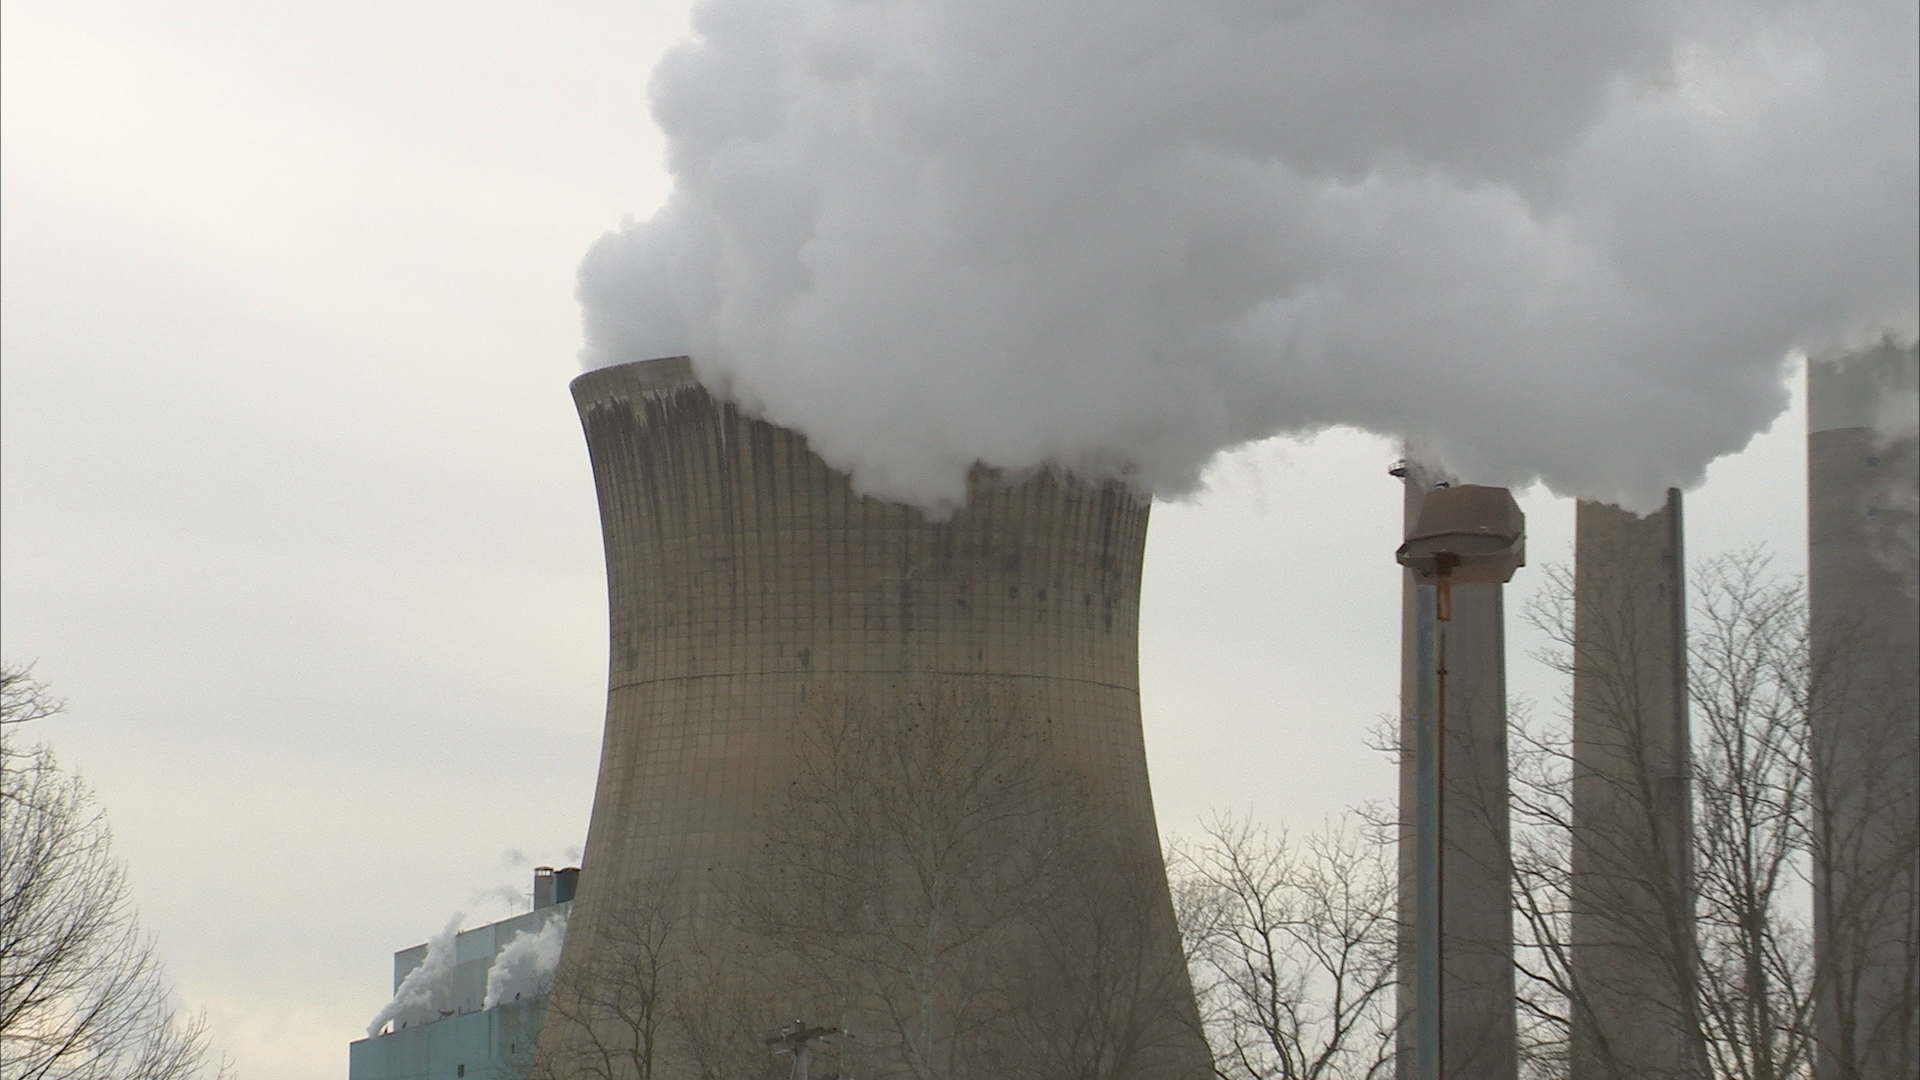 Groups Ask PSC To Reconsider Approval Of Pleasants Power Station Plan